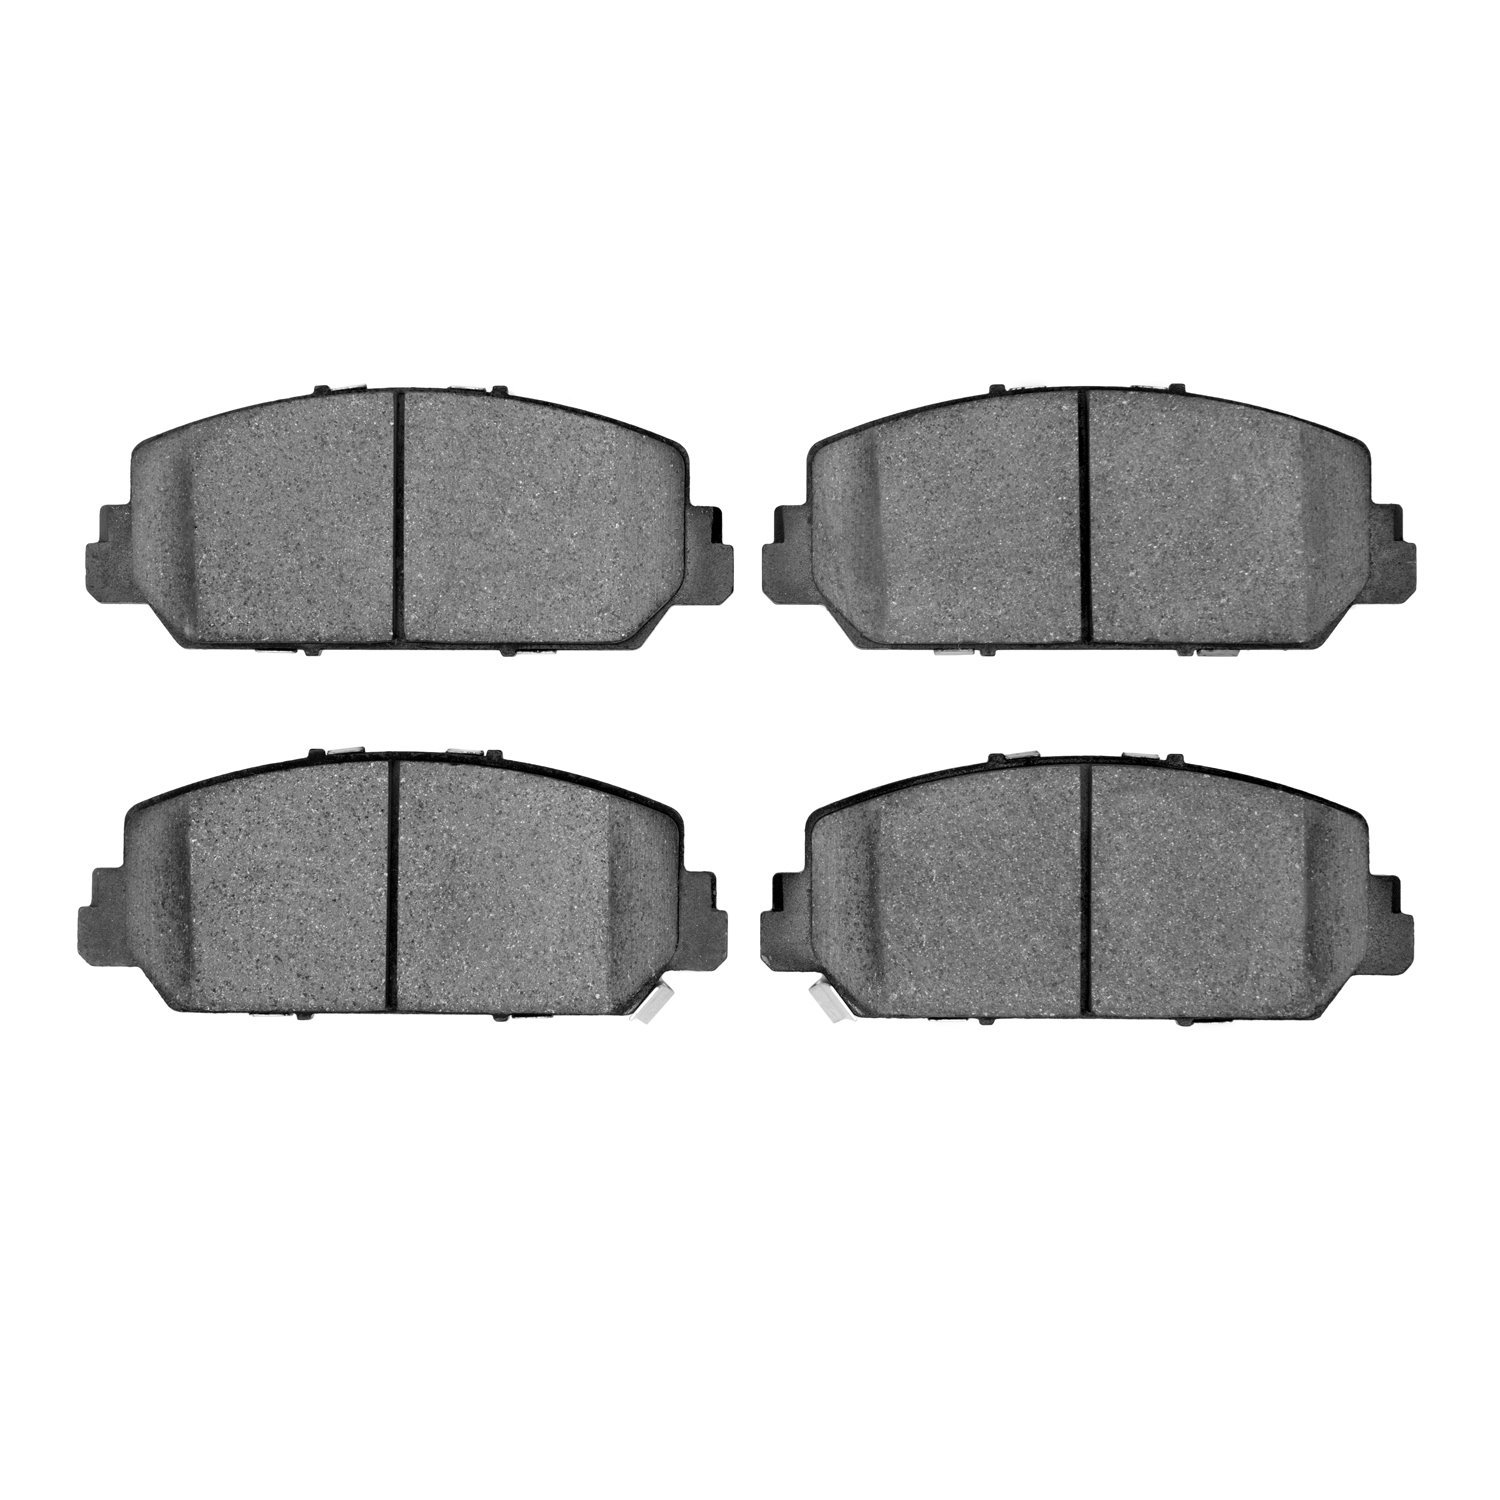 1551-1697-00 5000 Advanced Ceramic Brake Pads, Fits Select Acura/Honda, Position: Front